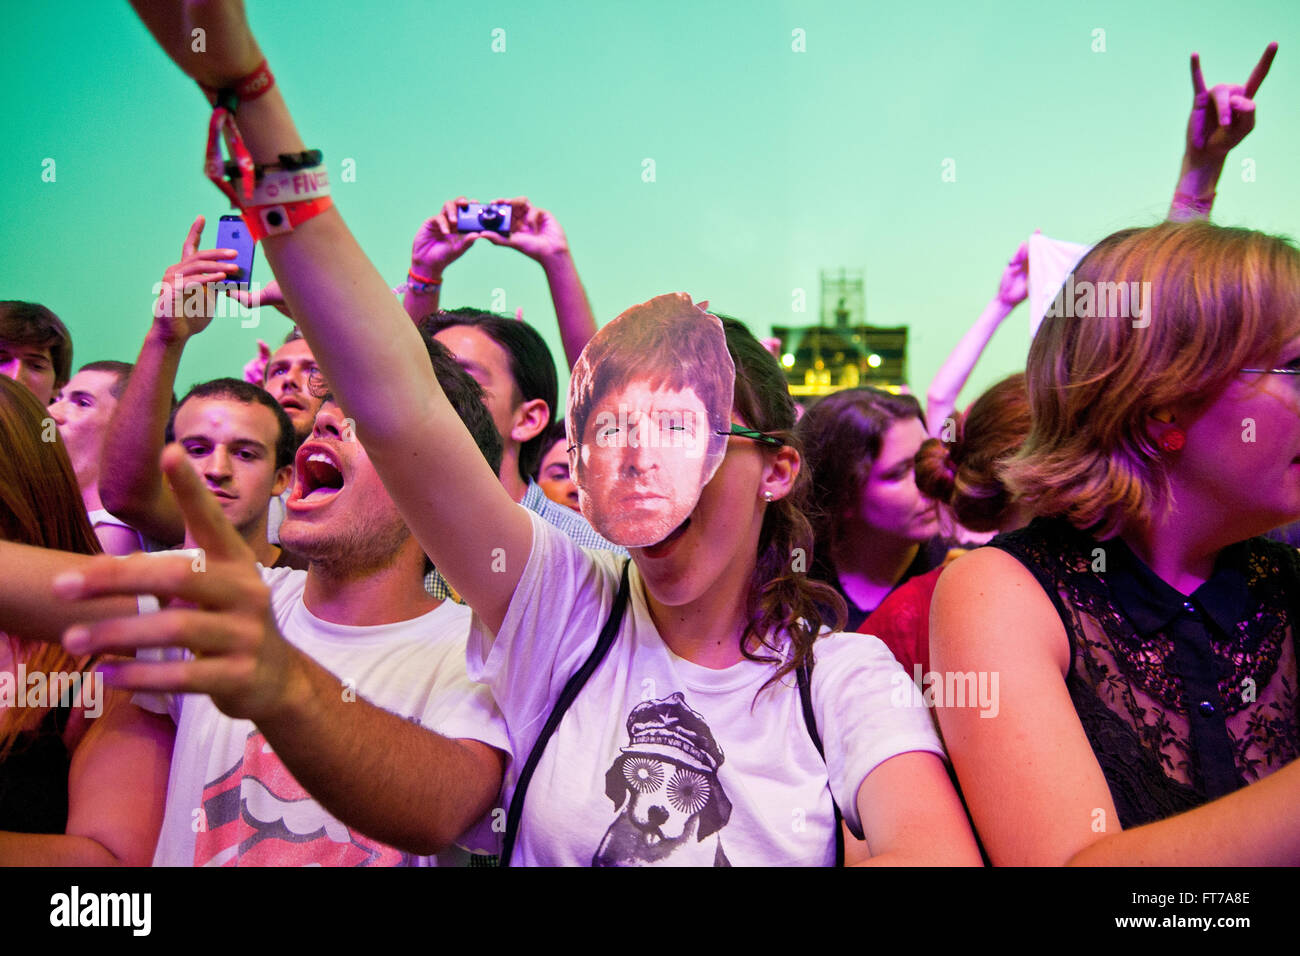 BENICASSIM, SPAIN - JULY 19: A woman from the crowd with a mask of Noel Gallagher (Oasis) at FIB. Stock Photo